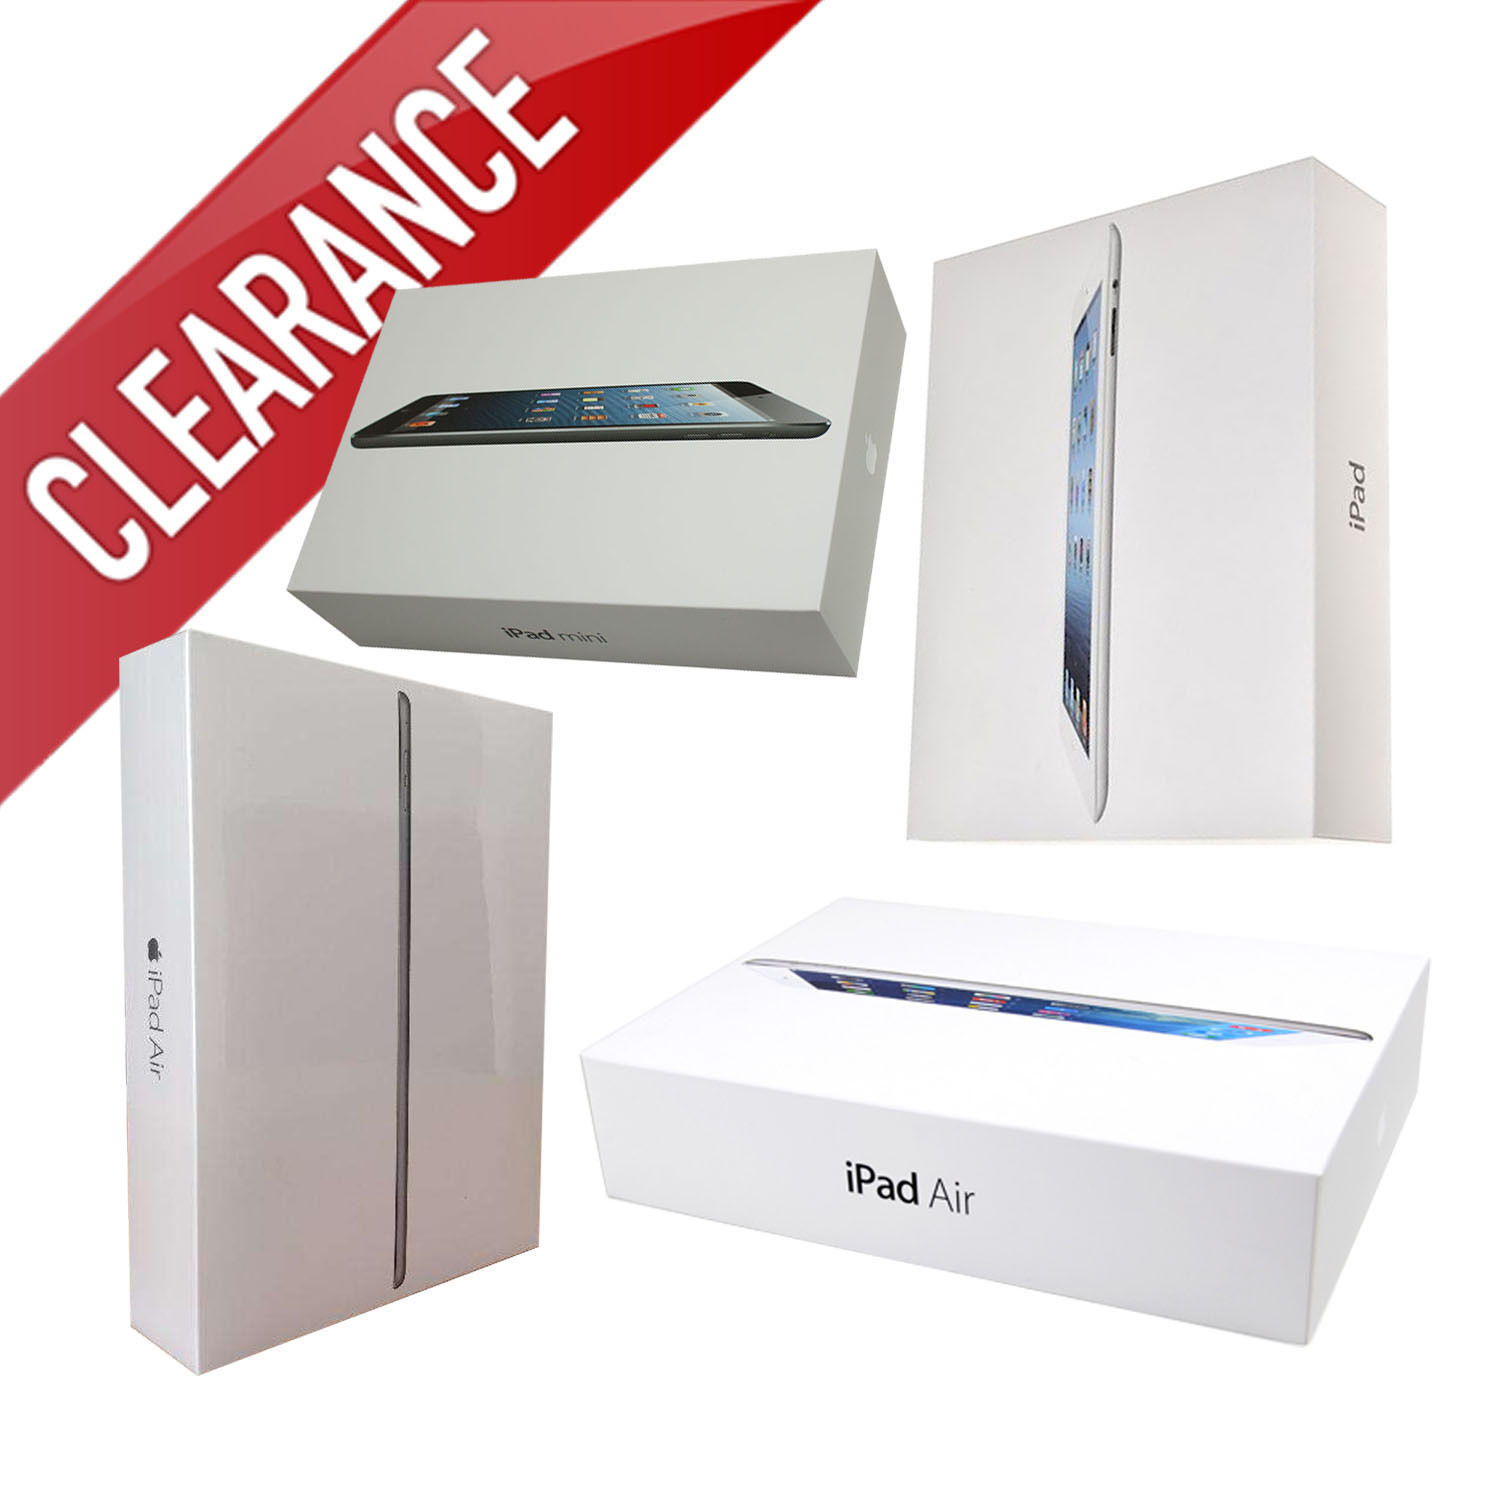 Apple iPad Air-mini-1-2-3-4 128GB-64GB-32GB-16GB Wi-Fi+4G 9.7in/7.9in Tablet Apple Does Not Apply